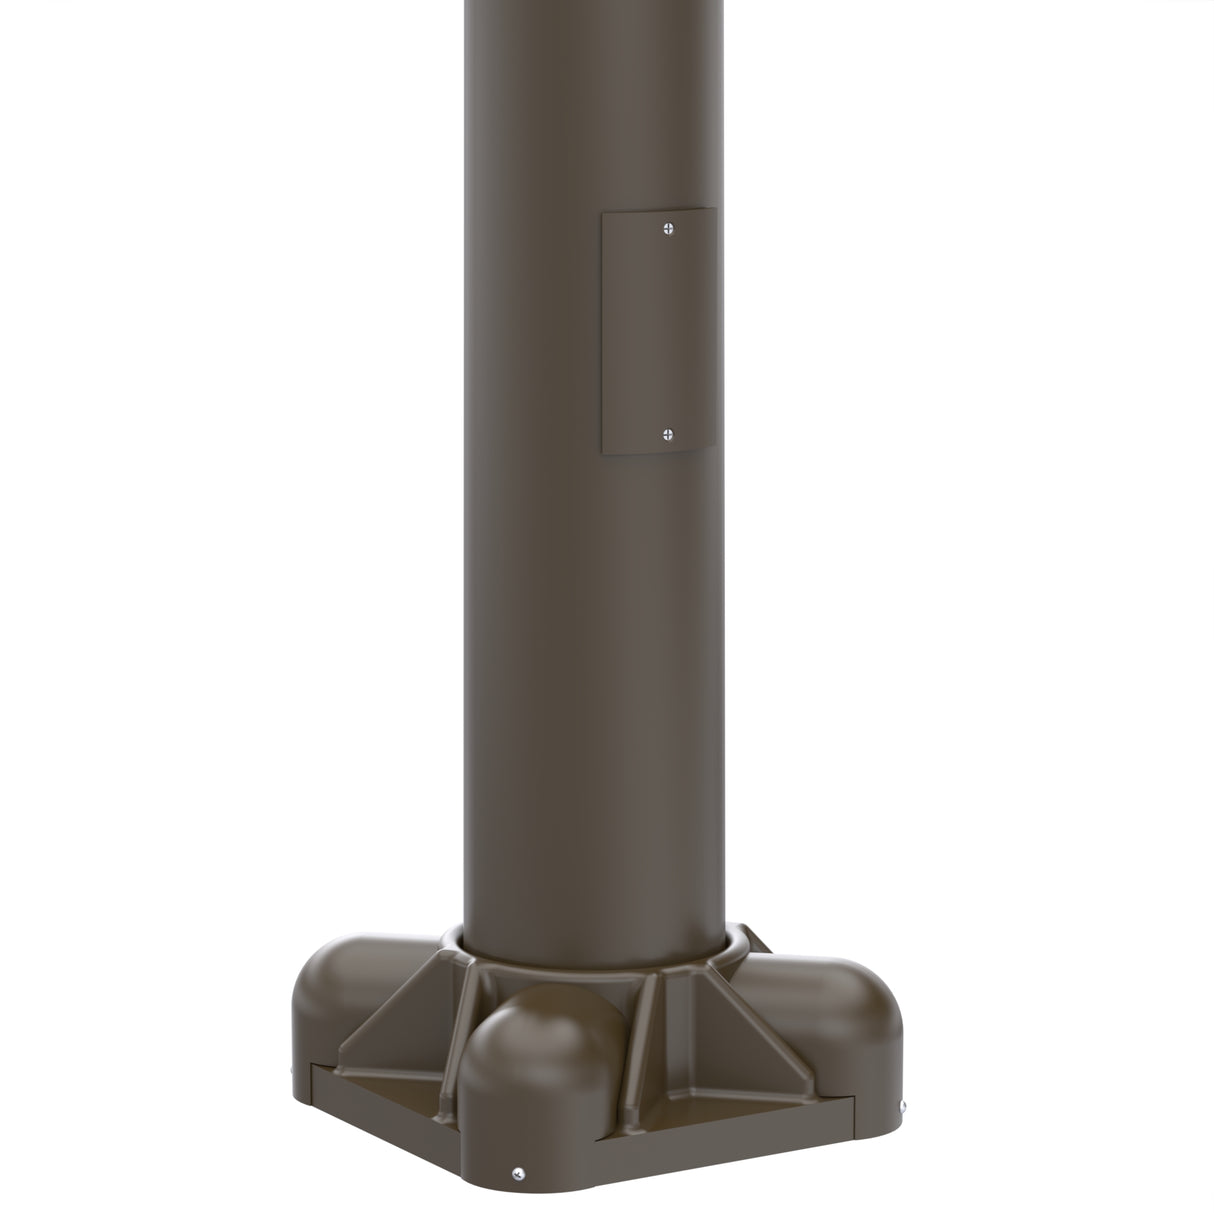 48' Tall x 10" Base OD x 6.0" Top OD x 0.250" Thick, Round Tapered Aluminum, Anchor Base Light Pole